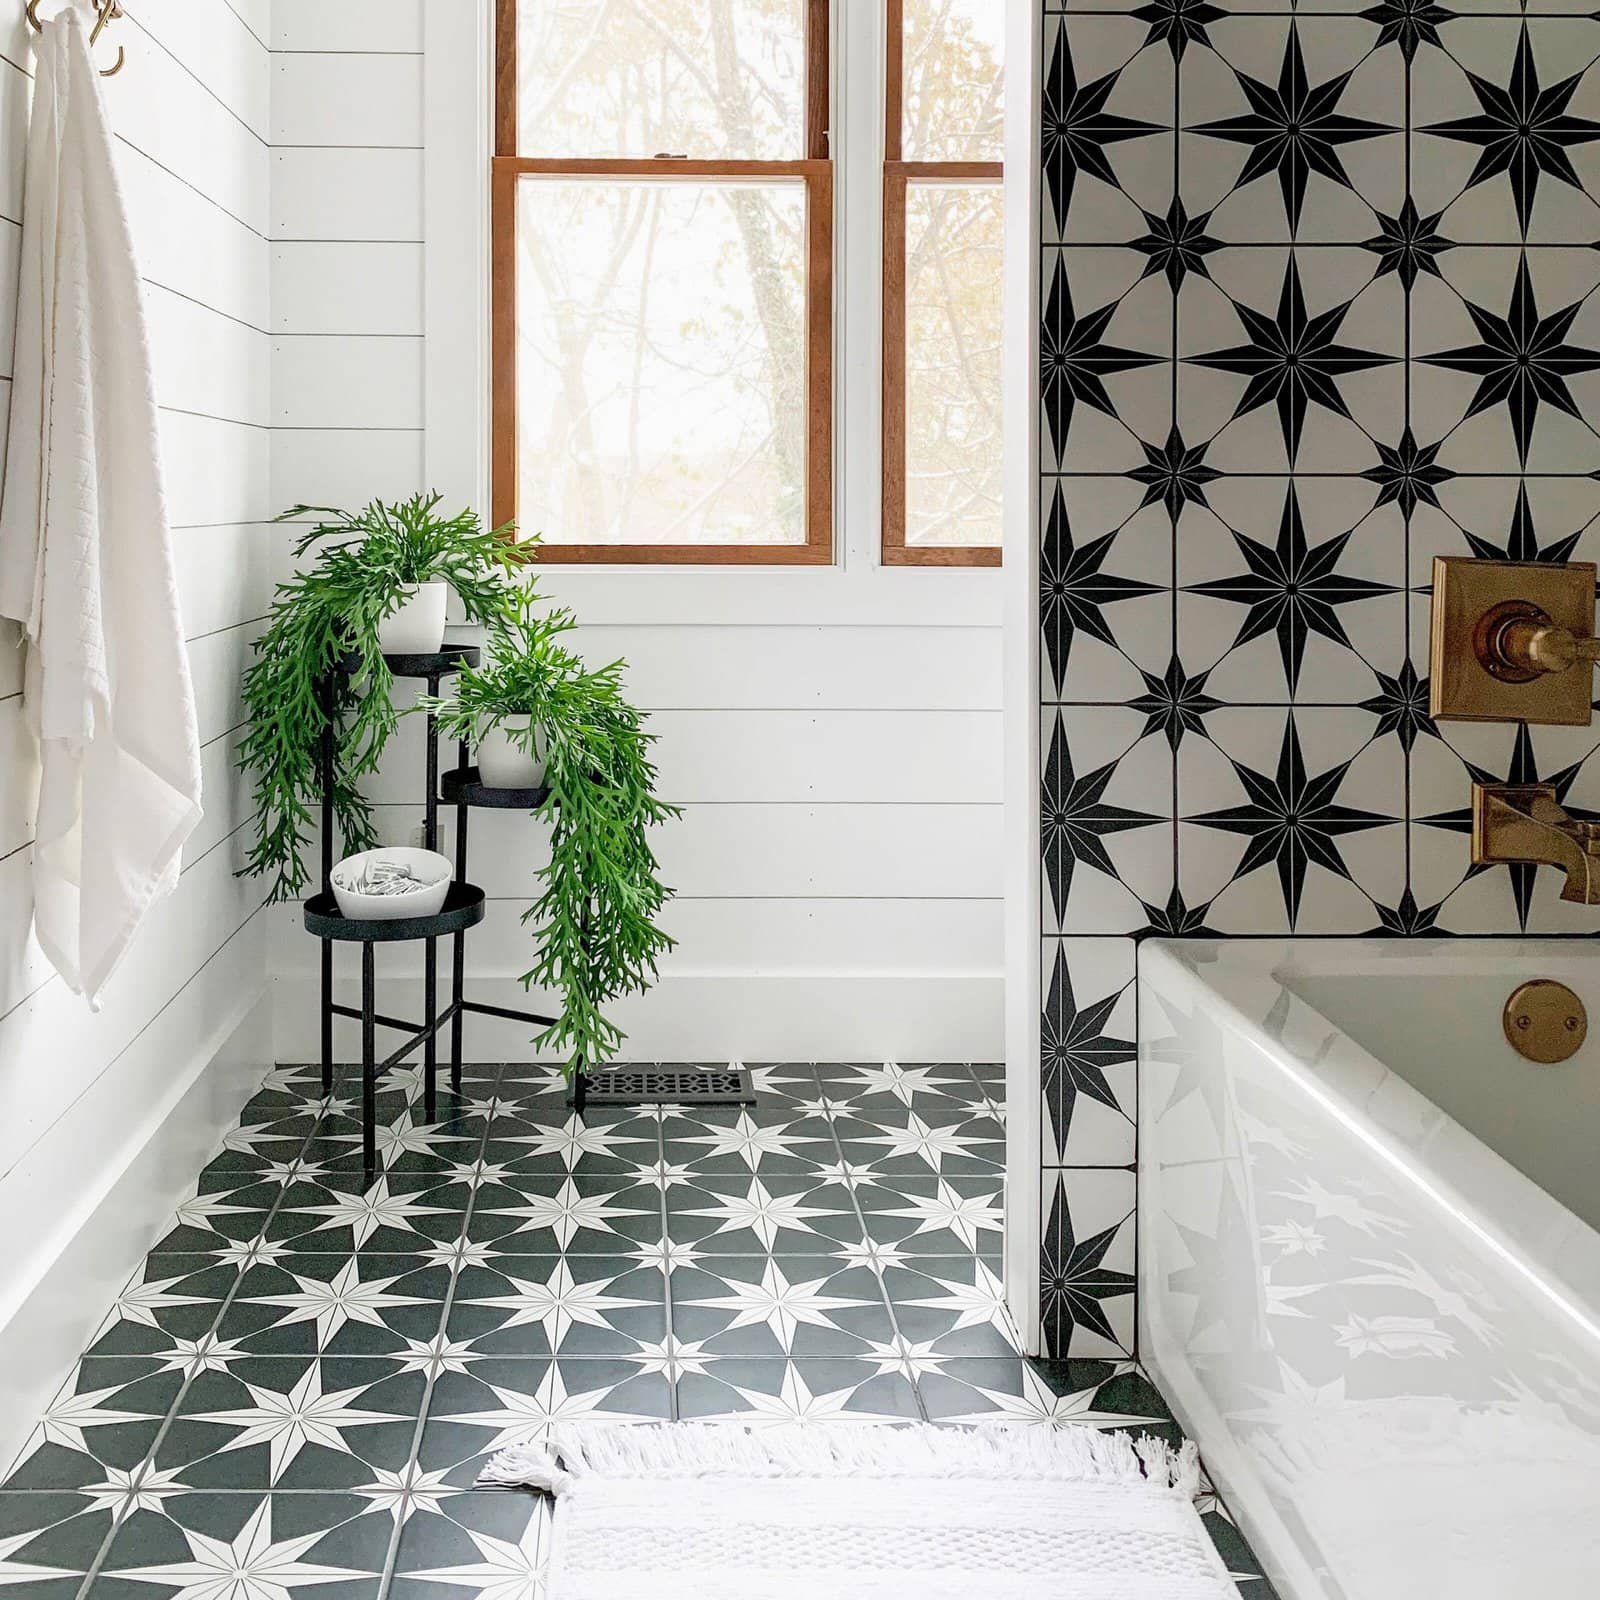 Go with a Black and White Patterned Field Tile